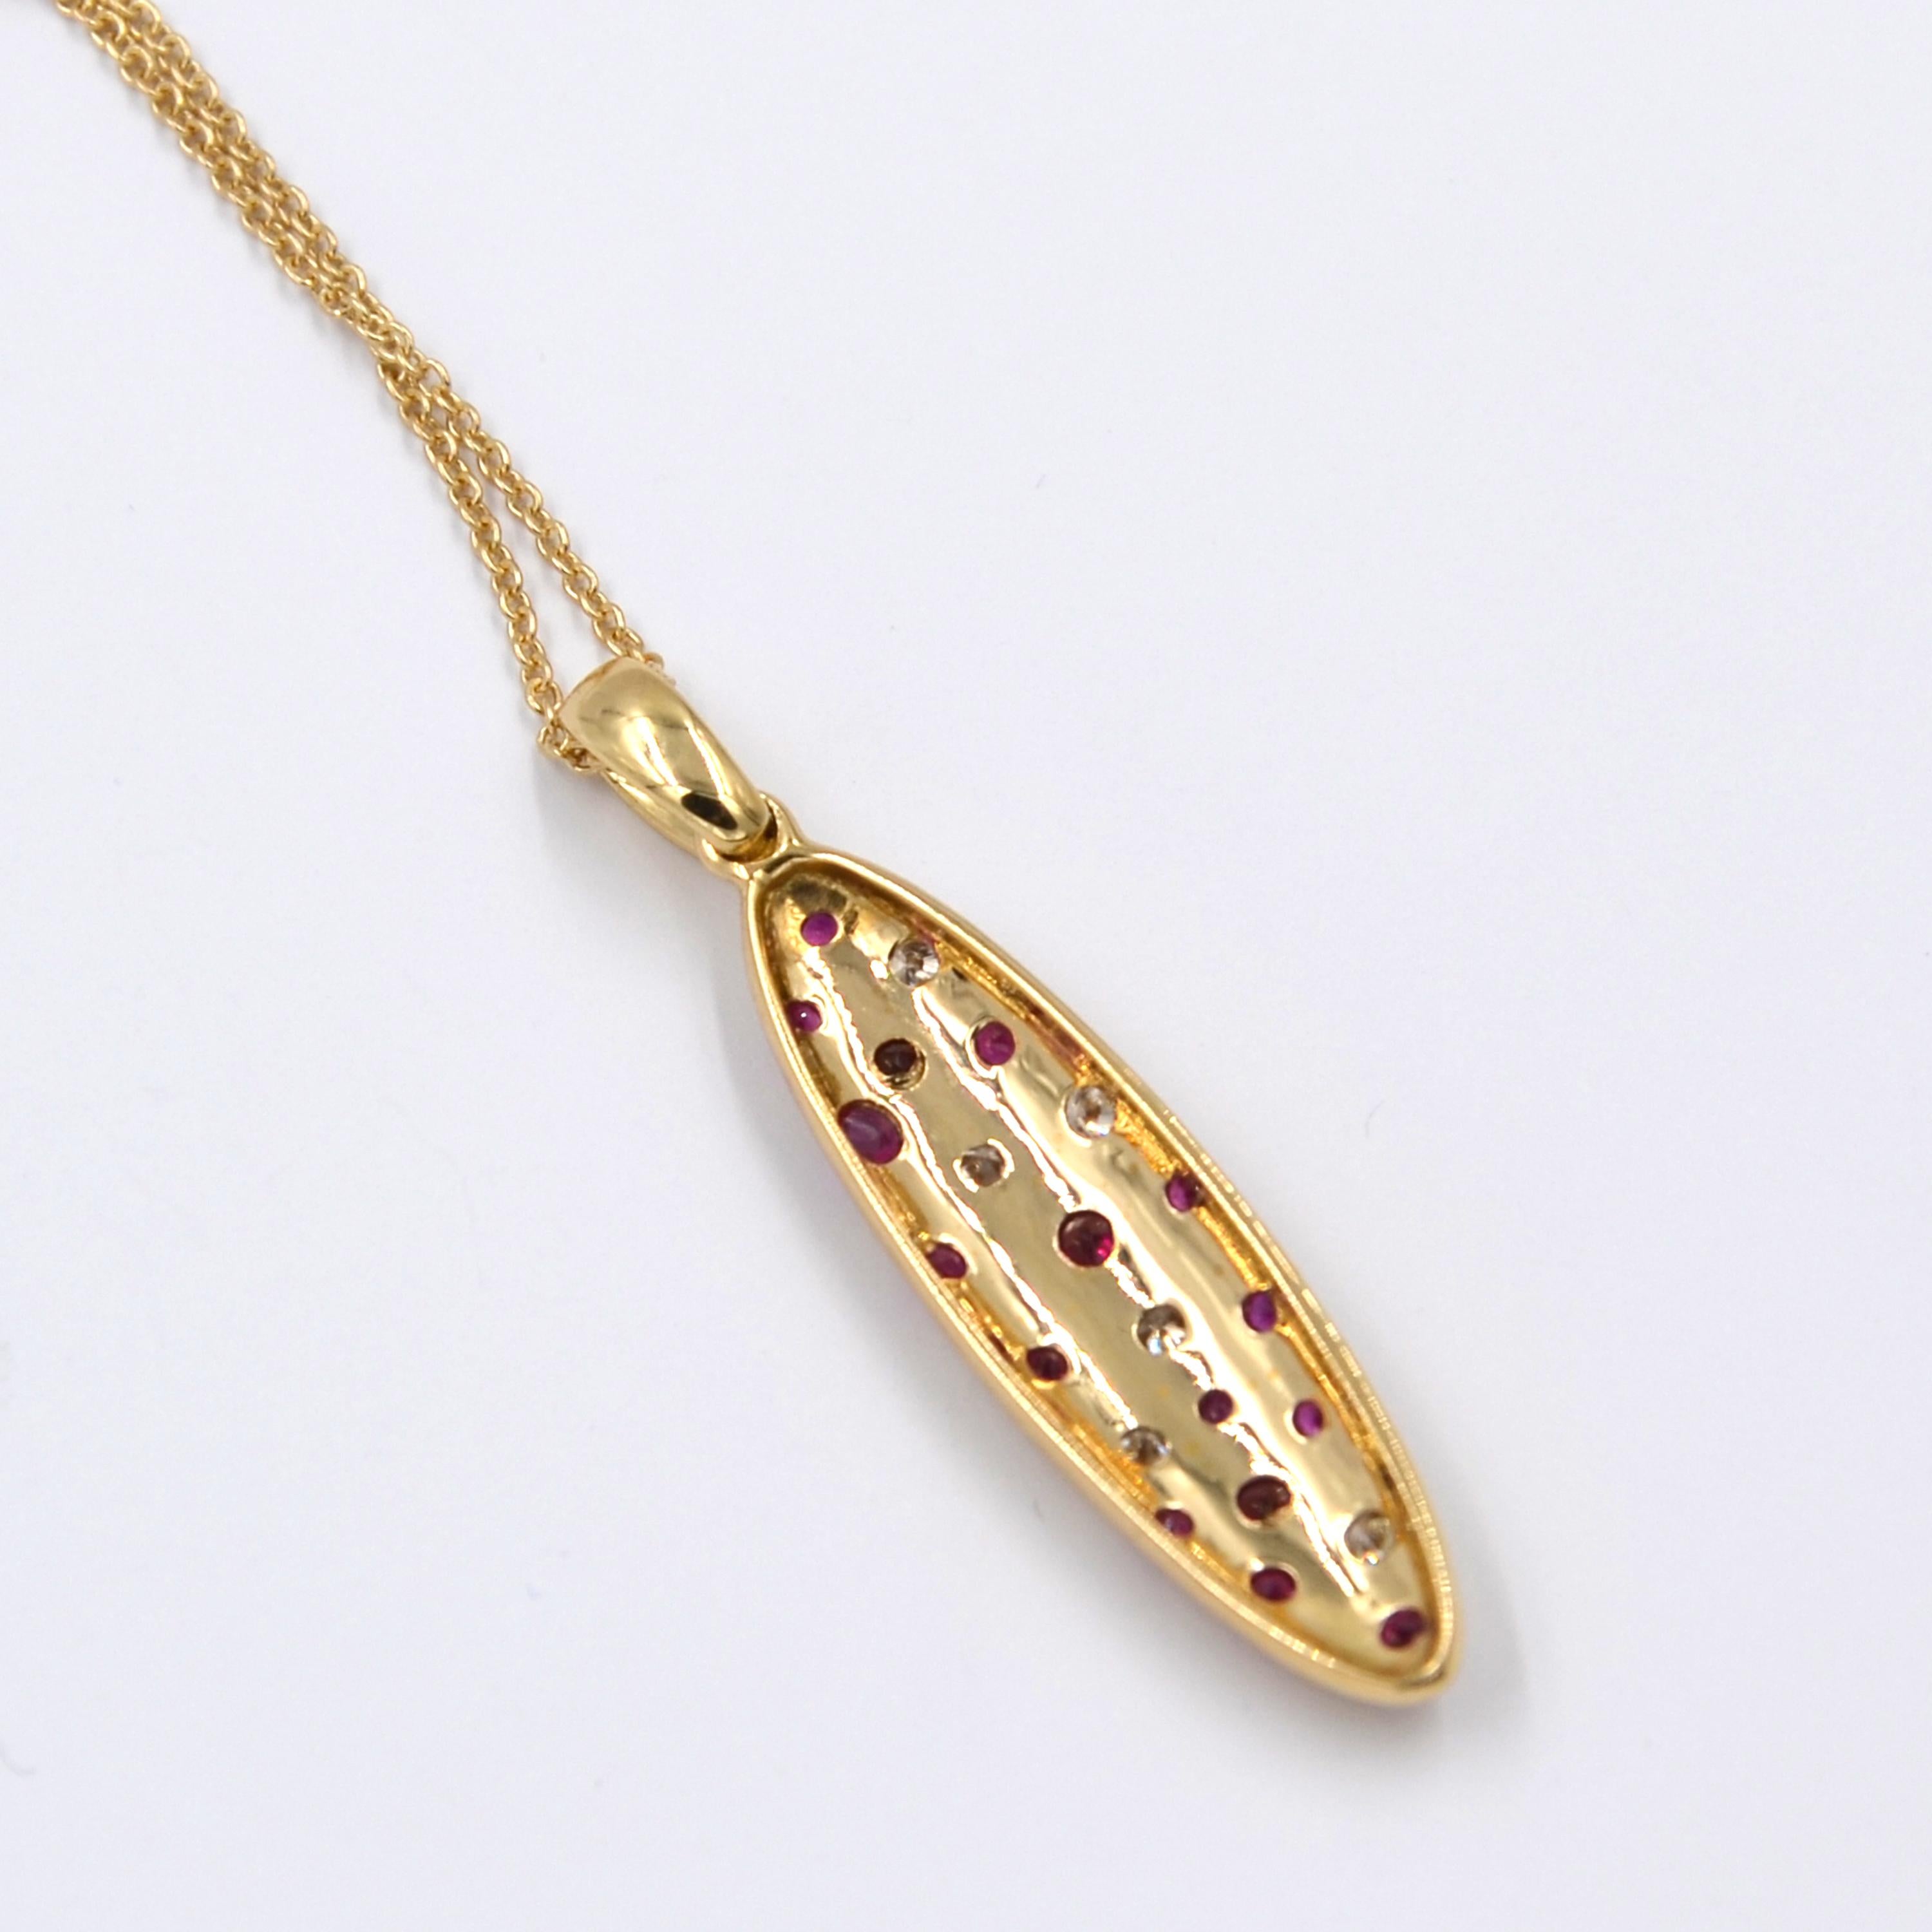 18kt Yellow Gold Rubies and Brown Diamonds Garavelli Matte Pendant with chain. The chain is in 18kt yellow gold. The chain lenght is cm 48 with a loop at 38   The pendant lenght is mm 40 
The front gold surface is hand hammered to create a matte